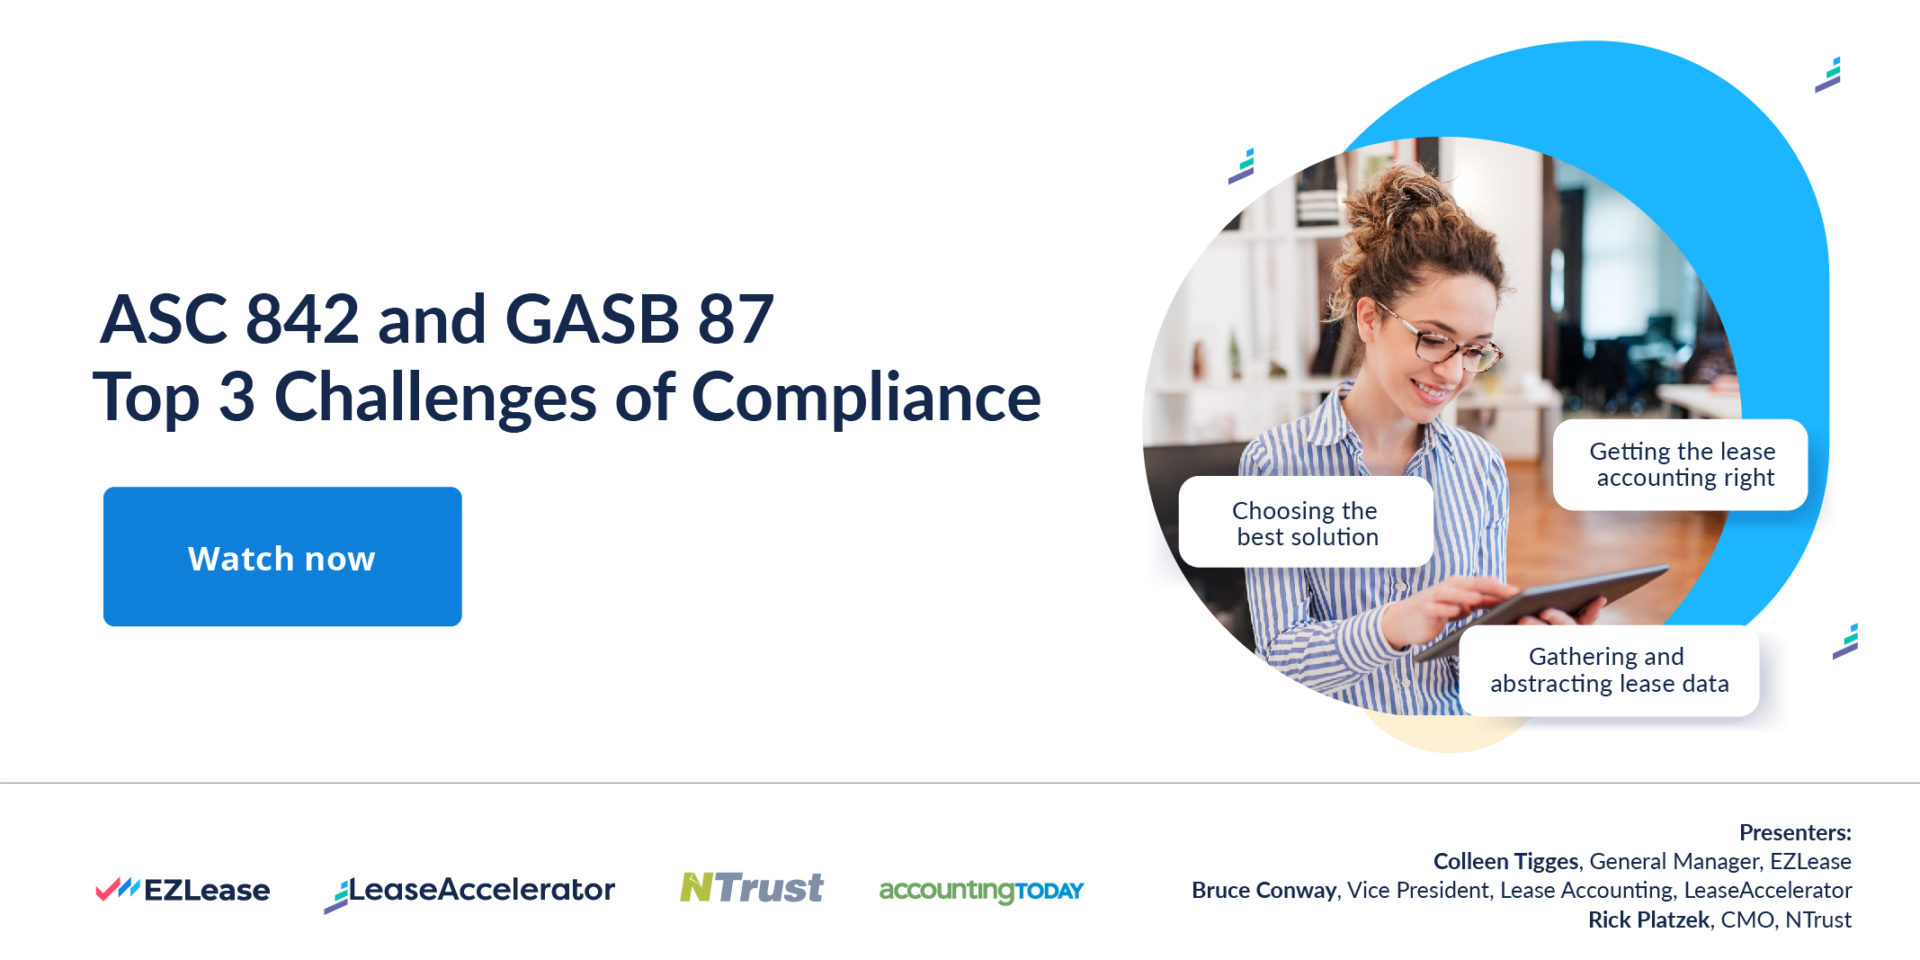 asc-842-and-gasb-87-top-three-challenges-of-compliance-ezlease